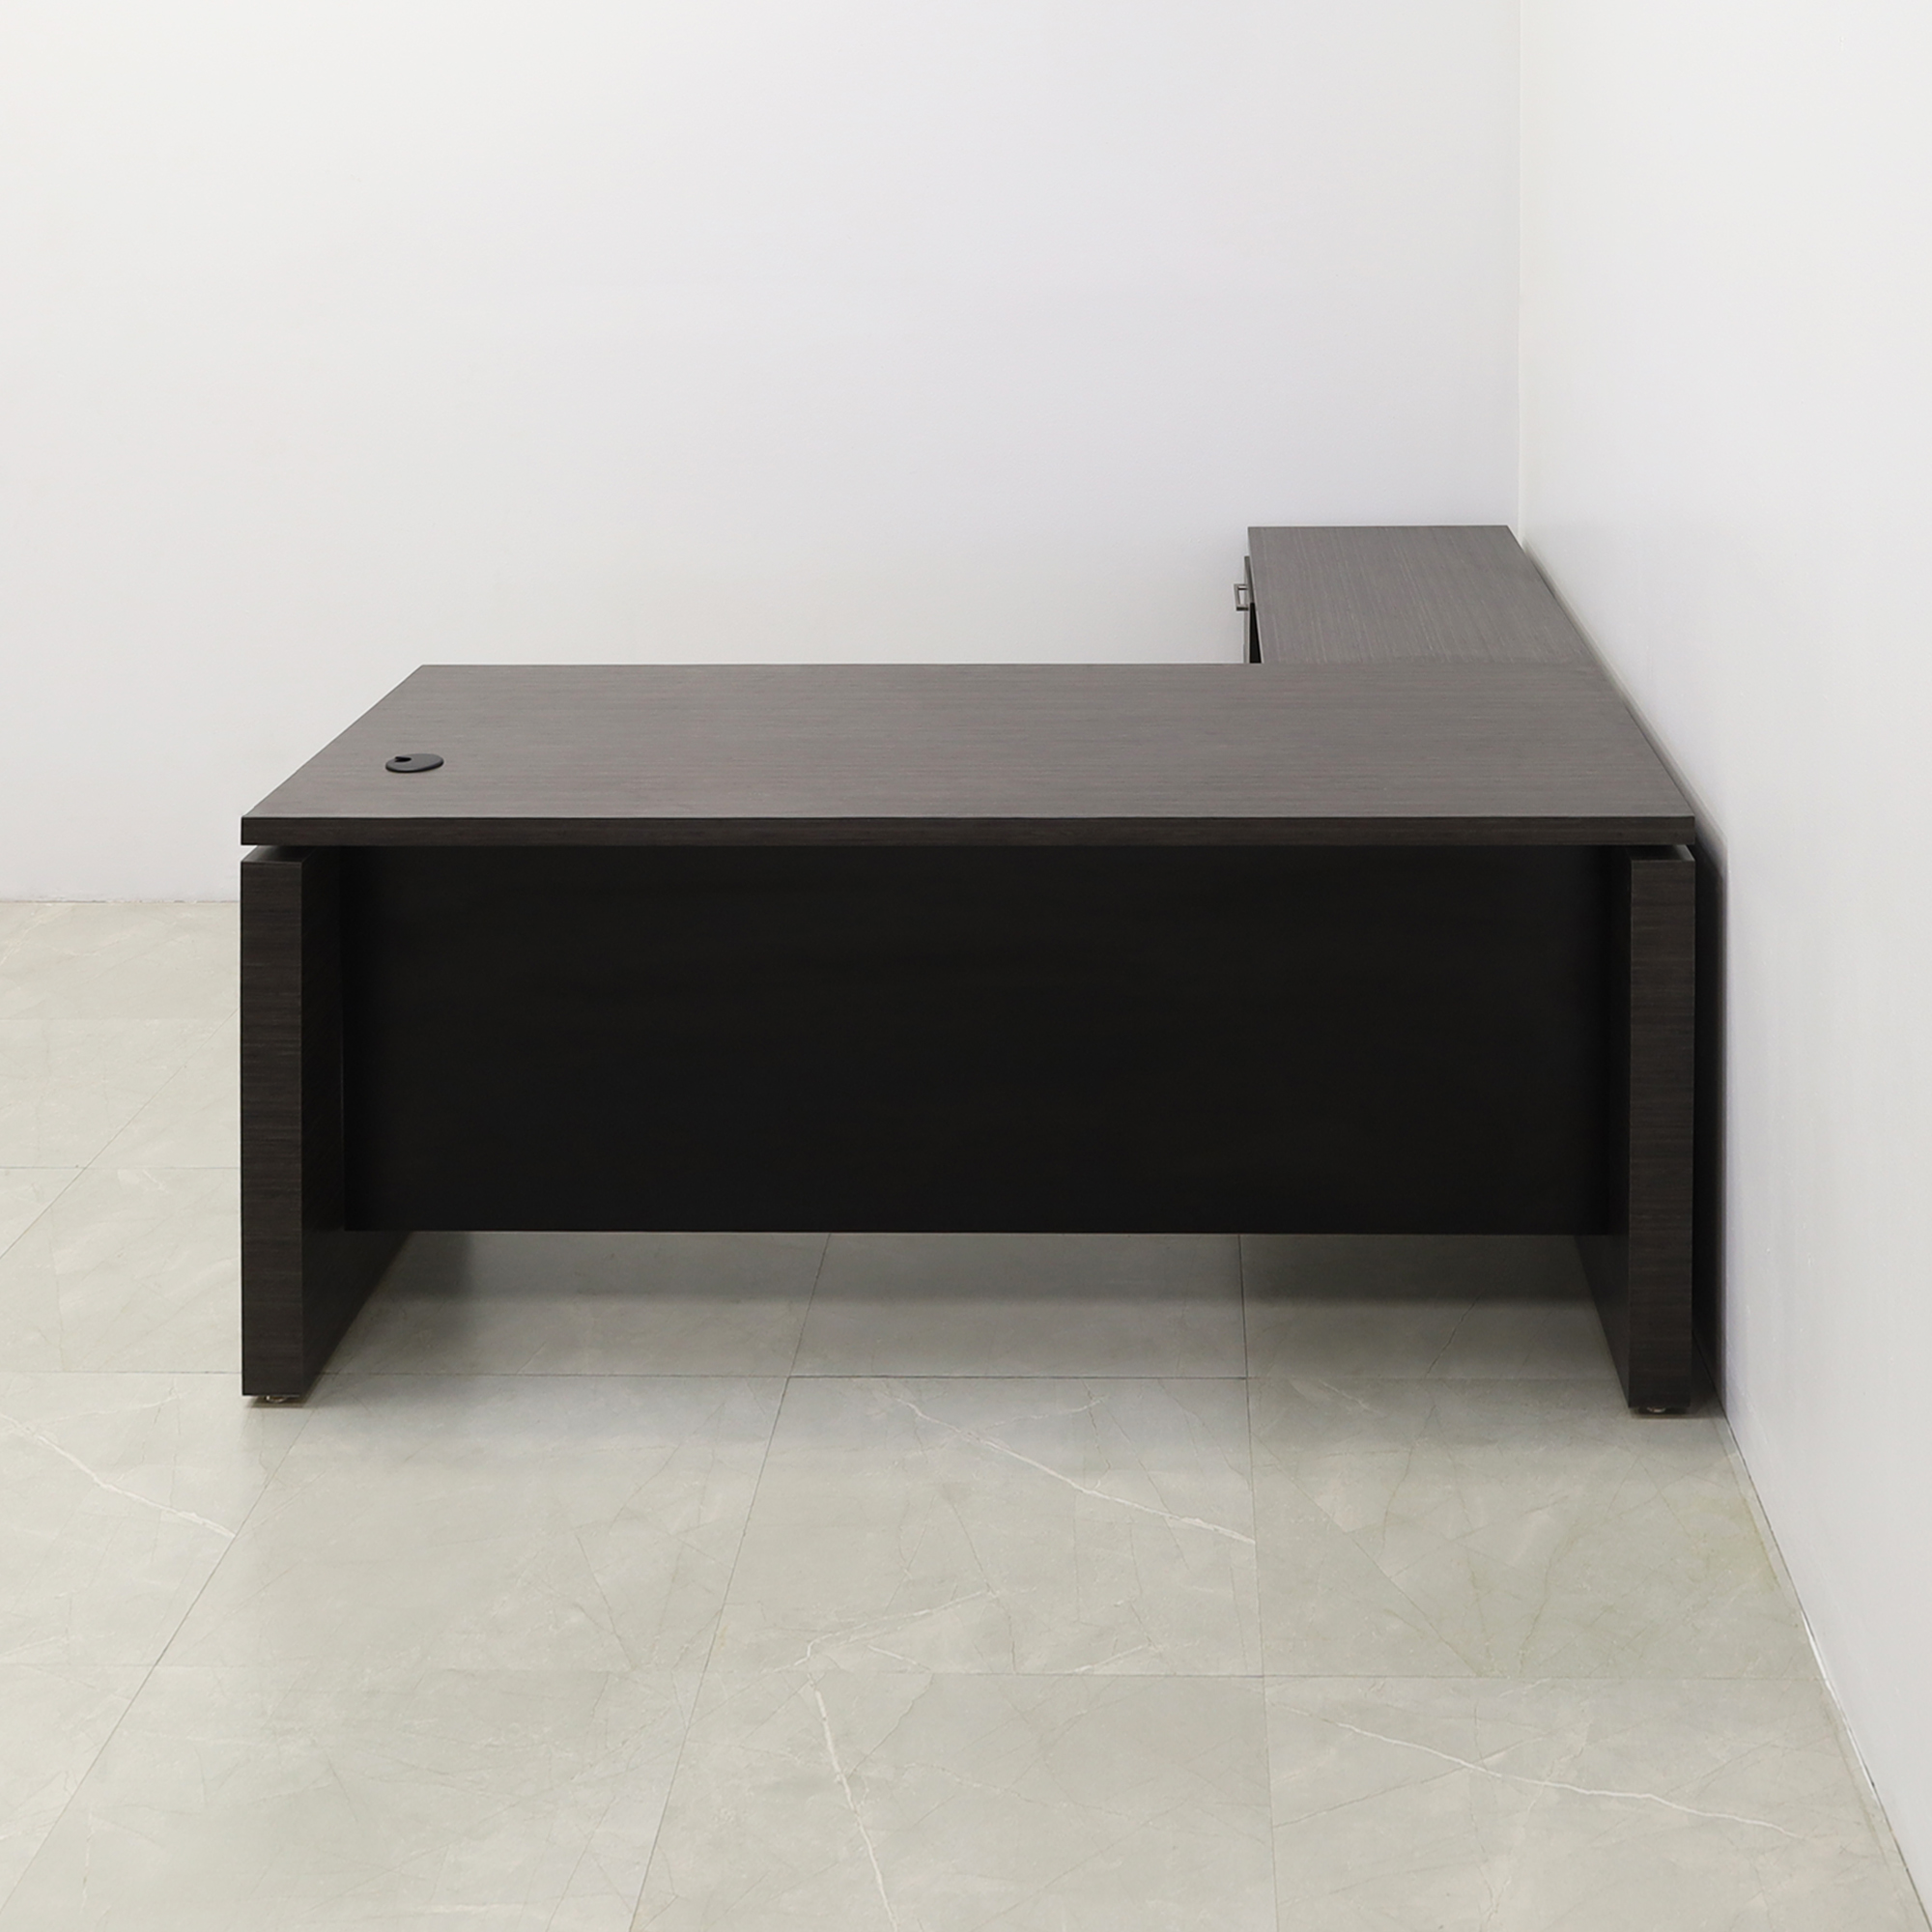 72-inch Denver L-Shape Executive Desk With Cabinet and Laminate Top, left return & cabinet side when sitting, in special laminate top, base and storage, and black matte laminate privacy panel, shown here.